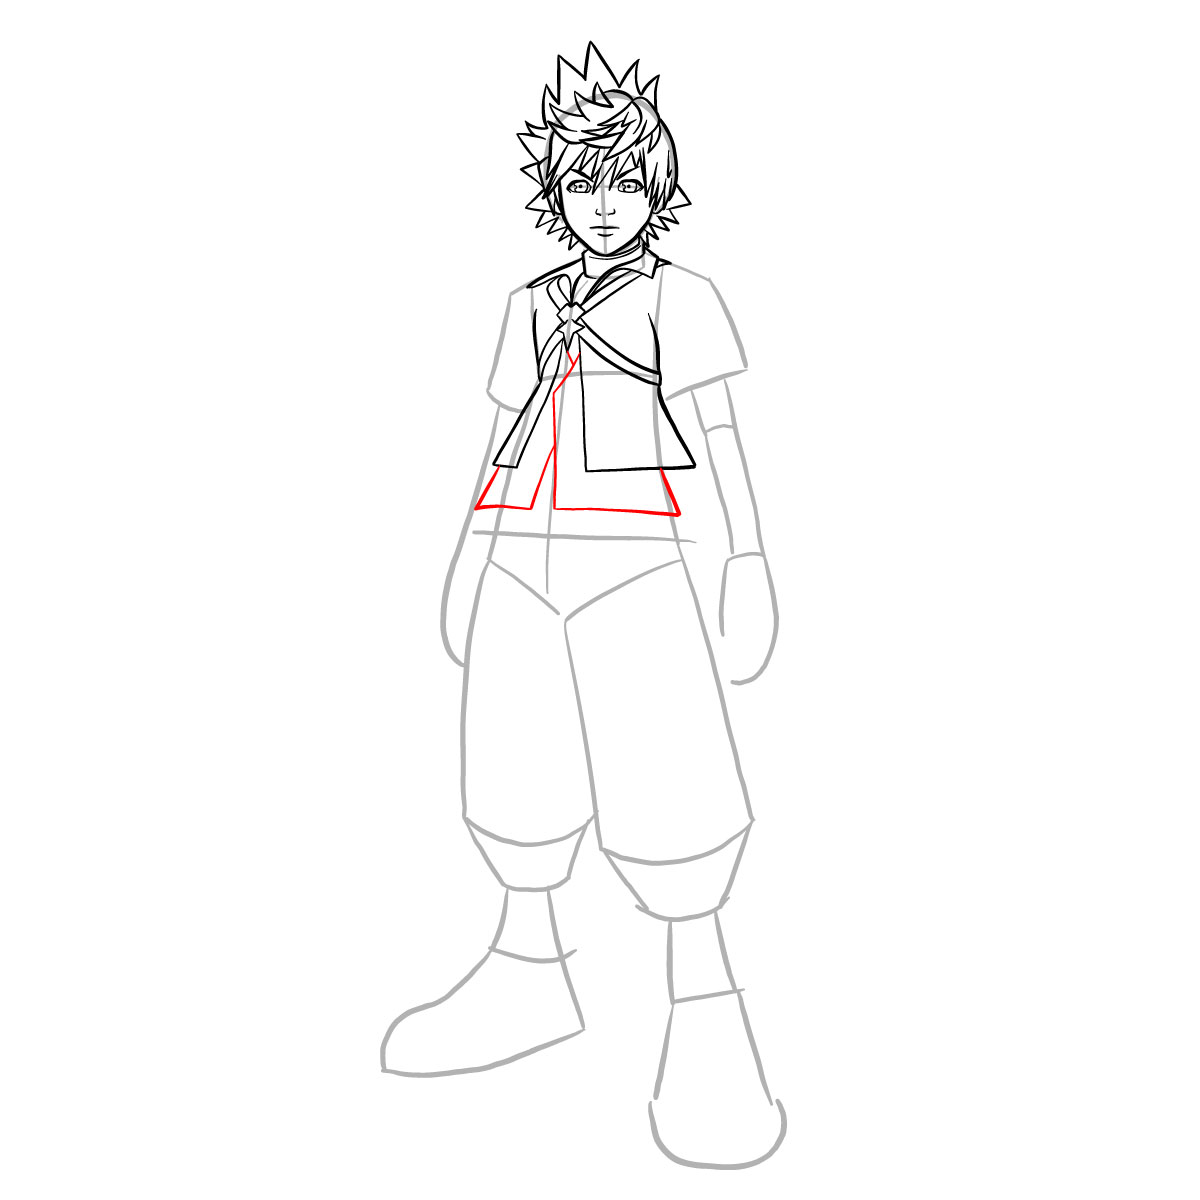 How to draw Ventus - Sketchok easy drawing guides